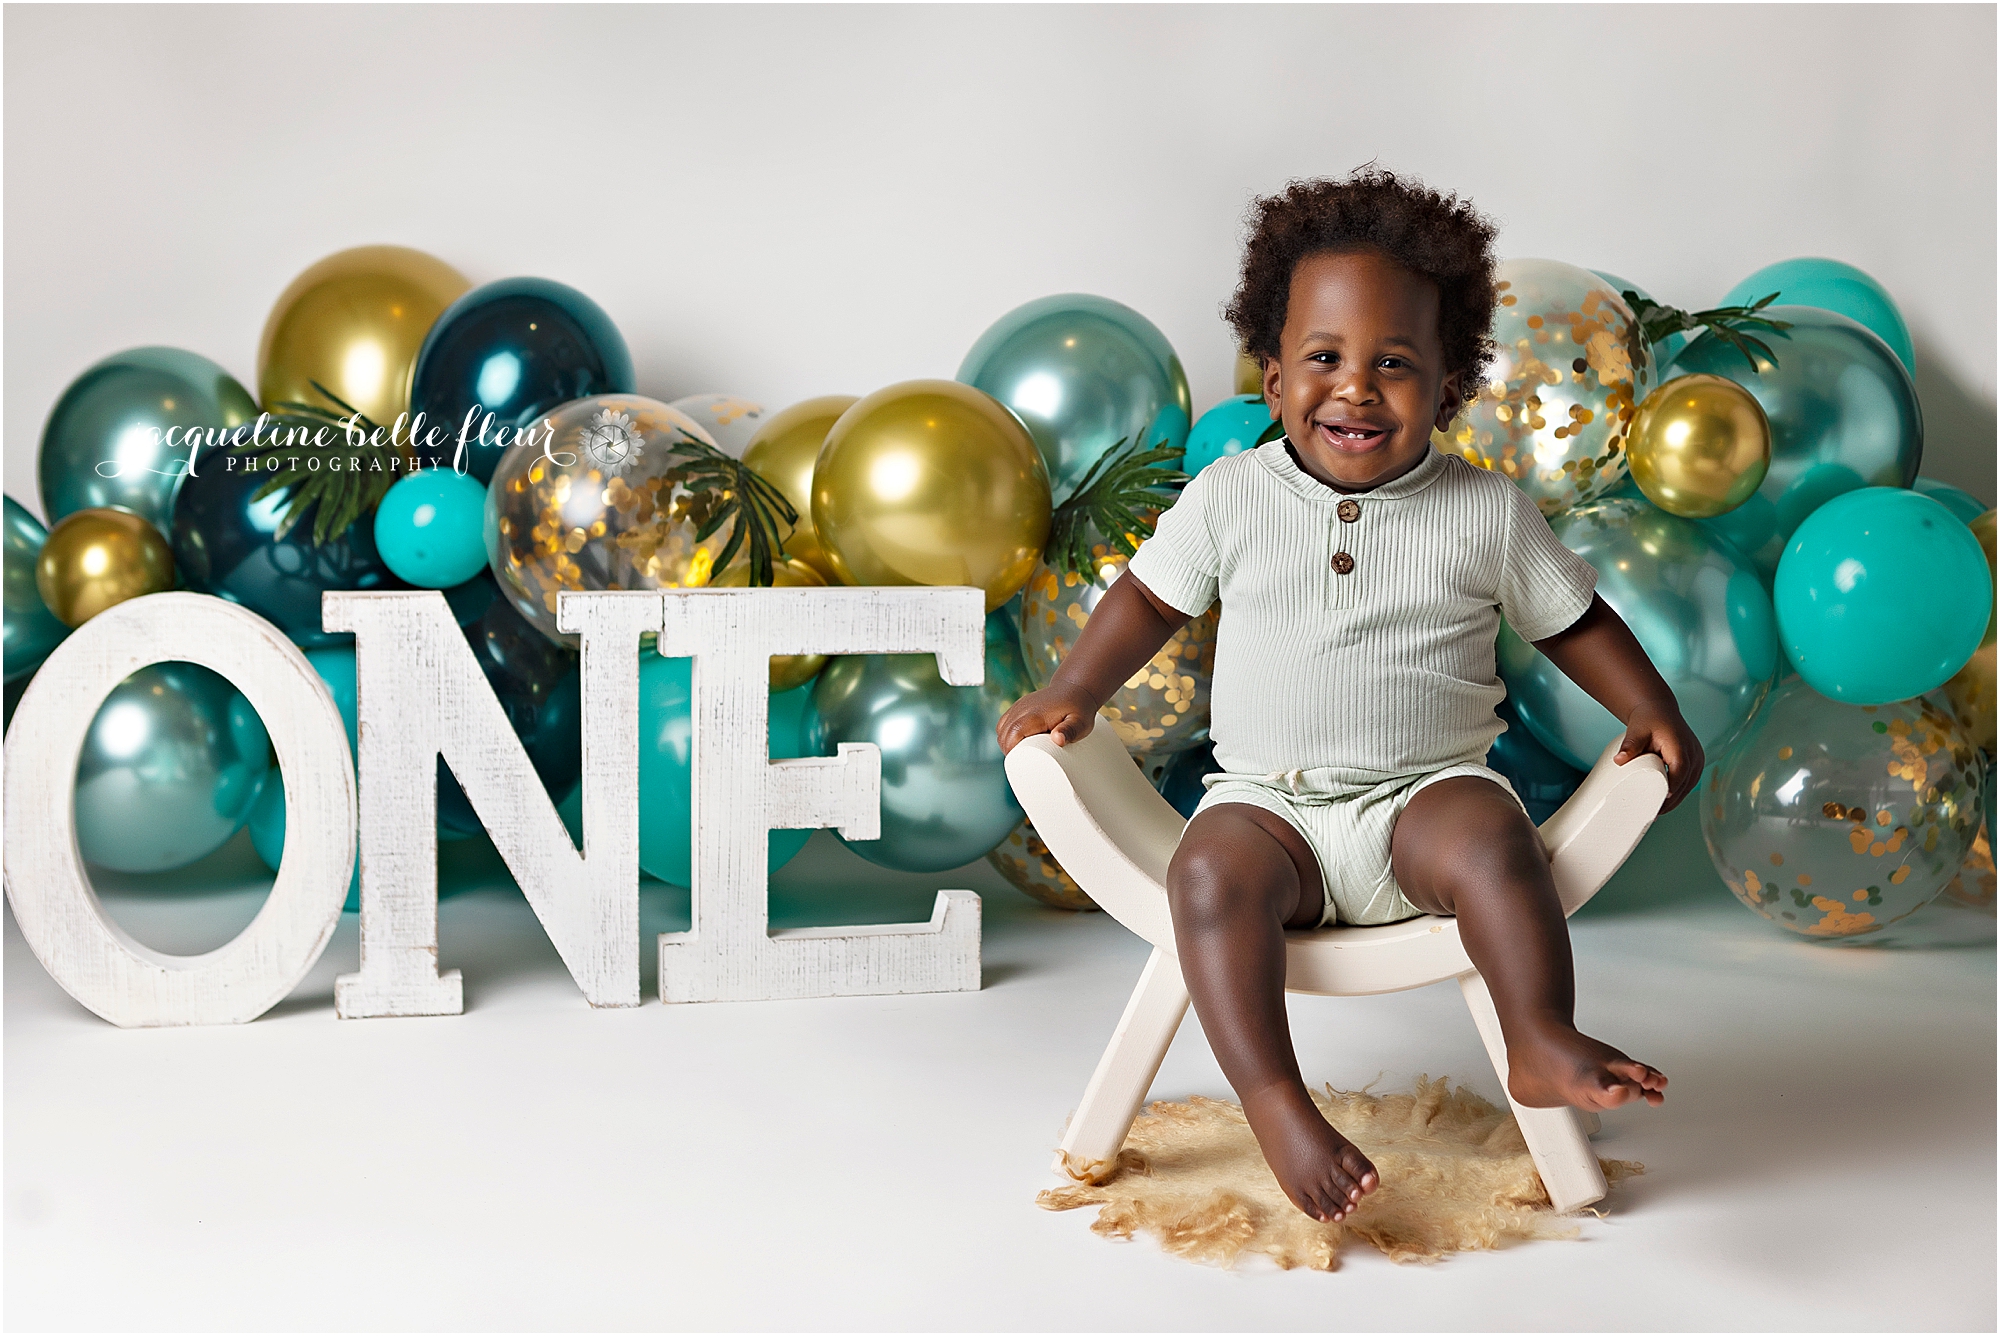 One Birthday Sign - 1st Birthday Party Decor - Perfect for First Birthday Photo Shoots, Cake Smashes, Photo Props